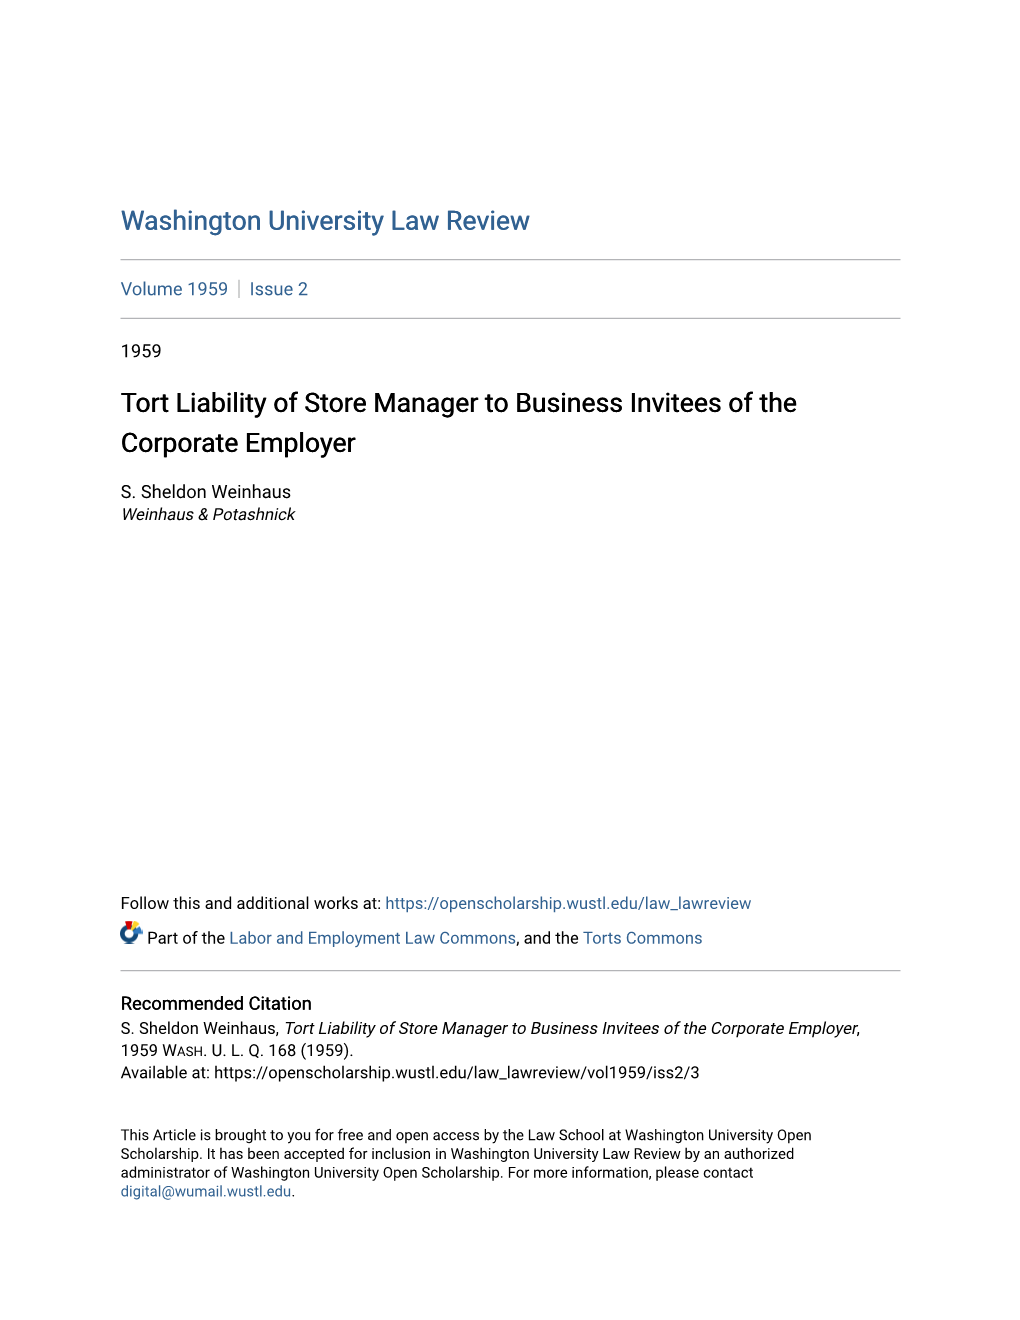 Tort Liability of Store Manager to Business Invitees of the Corporate Employer